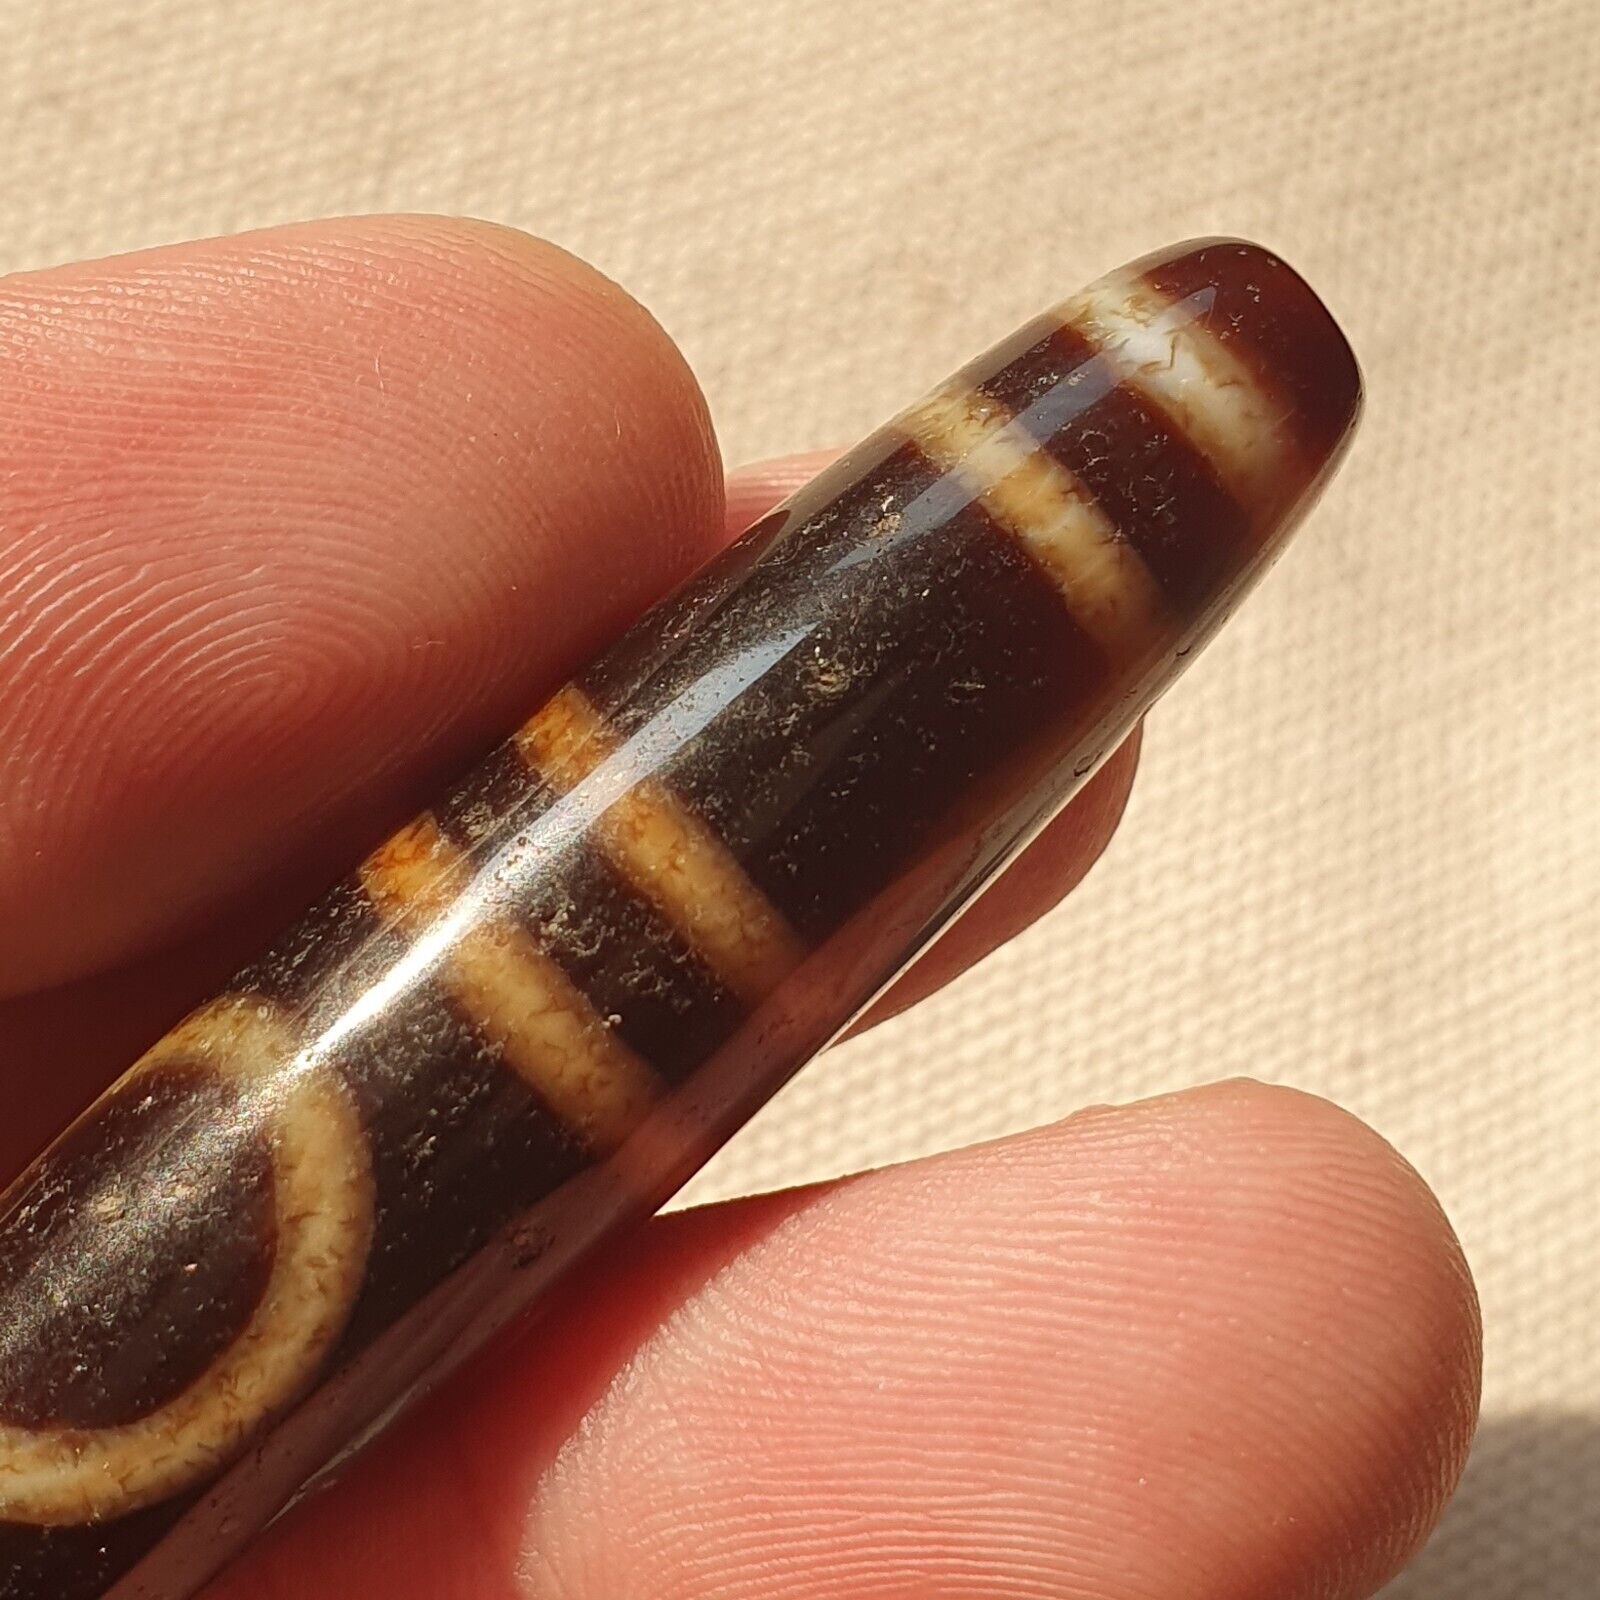 A Tibetan Heaven and Earth Dzi Bead/Amulet-With Cinnabar/Blood Spots Amulet